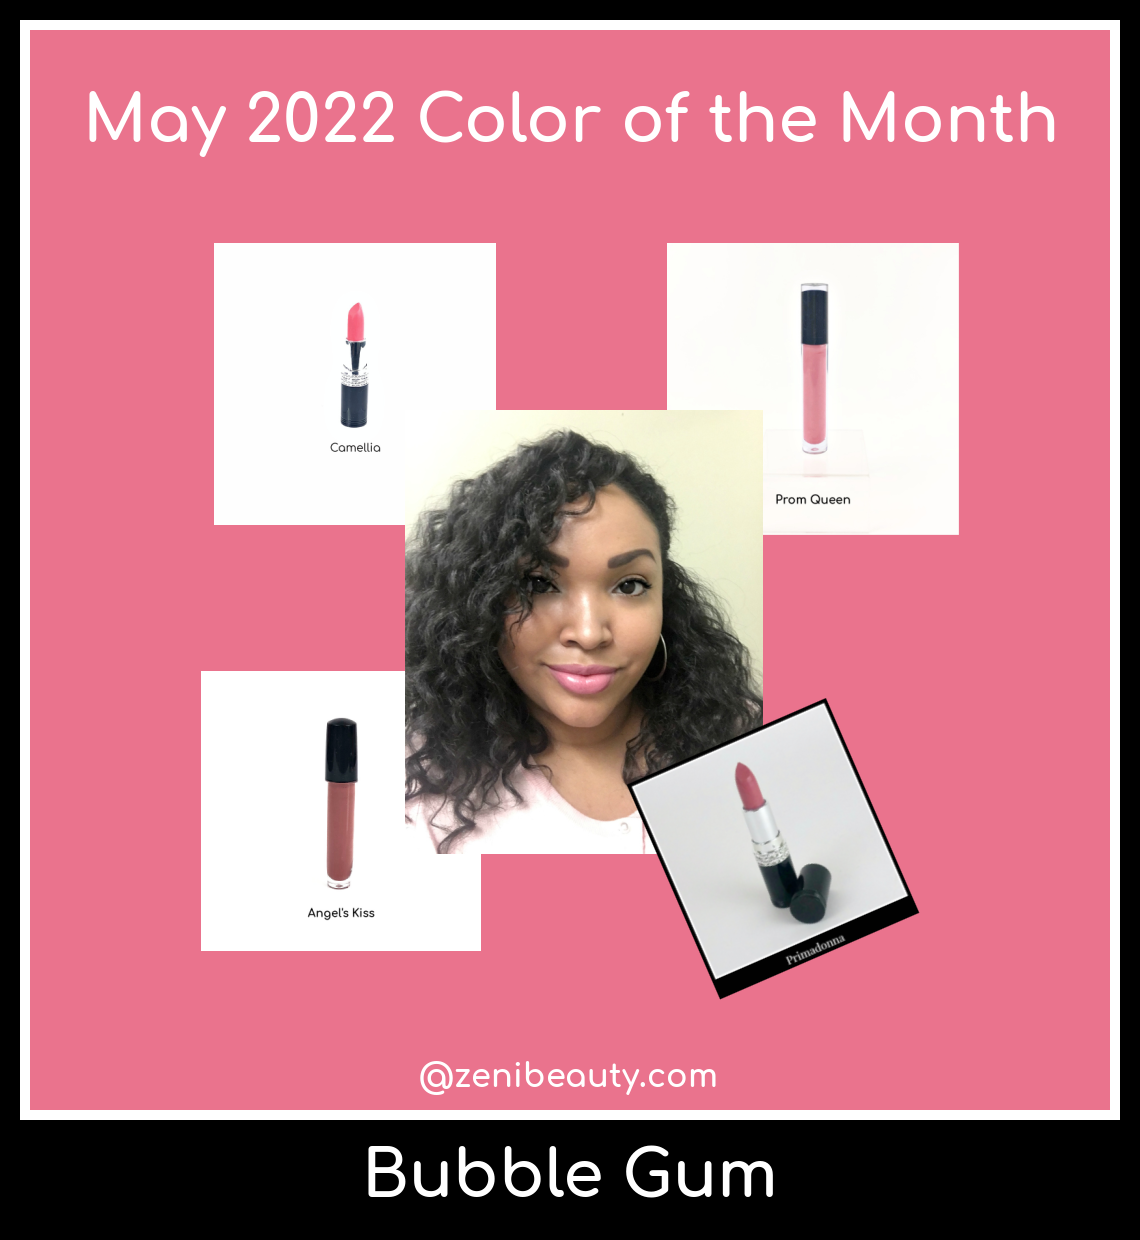 May 2022's Color of the Month is Bubble Gum